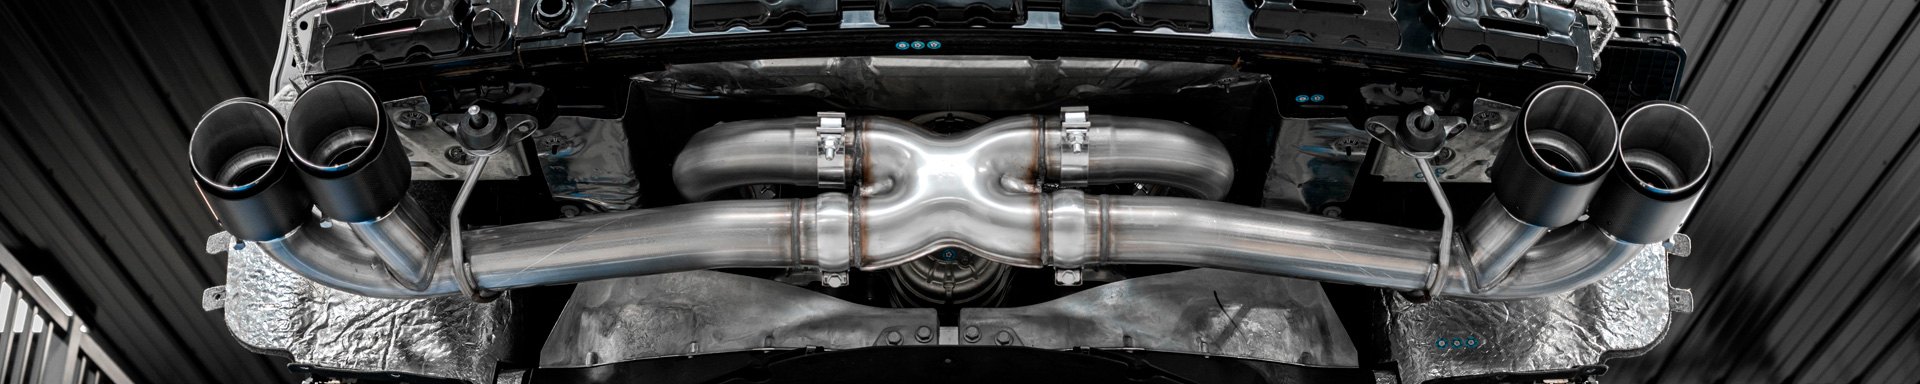 Push The Boundaries With New MBRP Pro-Series Performance Exhausts For 2021 Vette